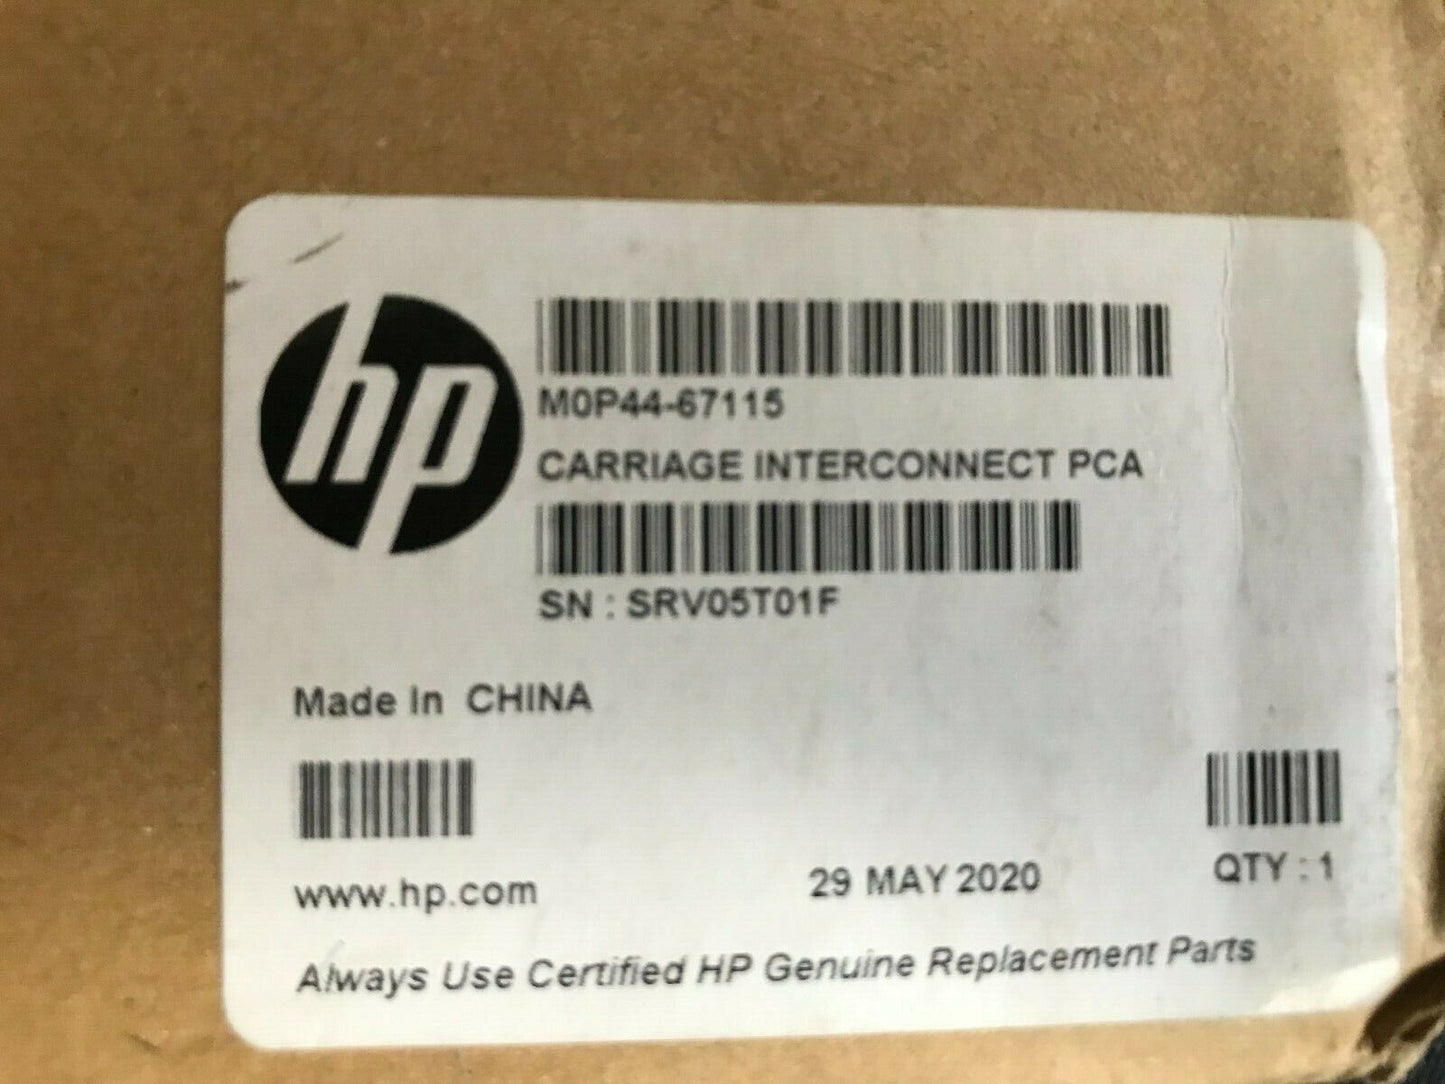 NEW HP M0P44-67115 Carriage interconnect PCA Board JET FUSION 3D 3200 4200 4210